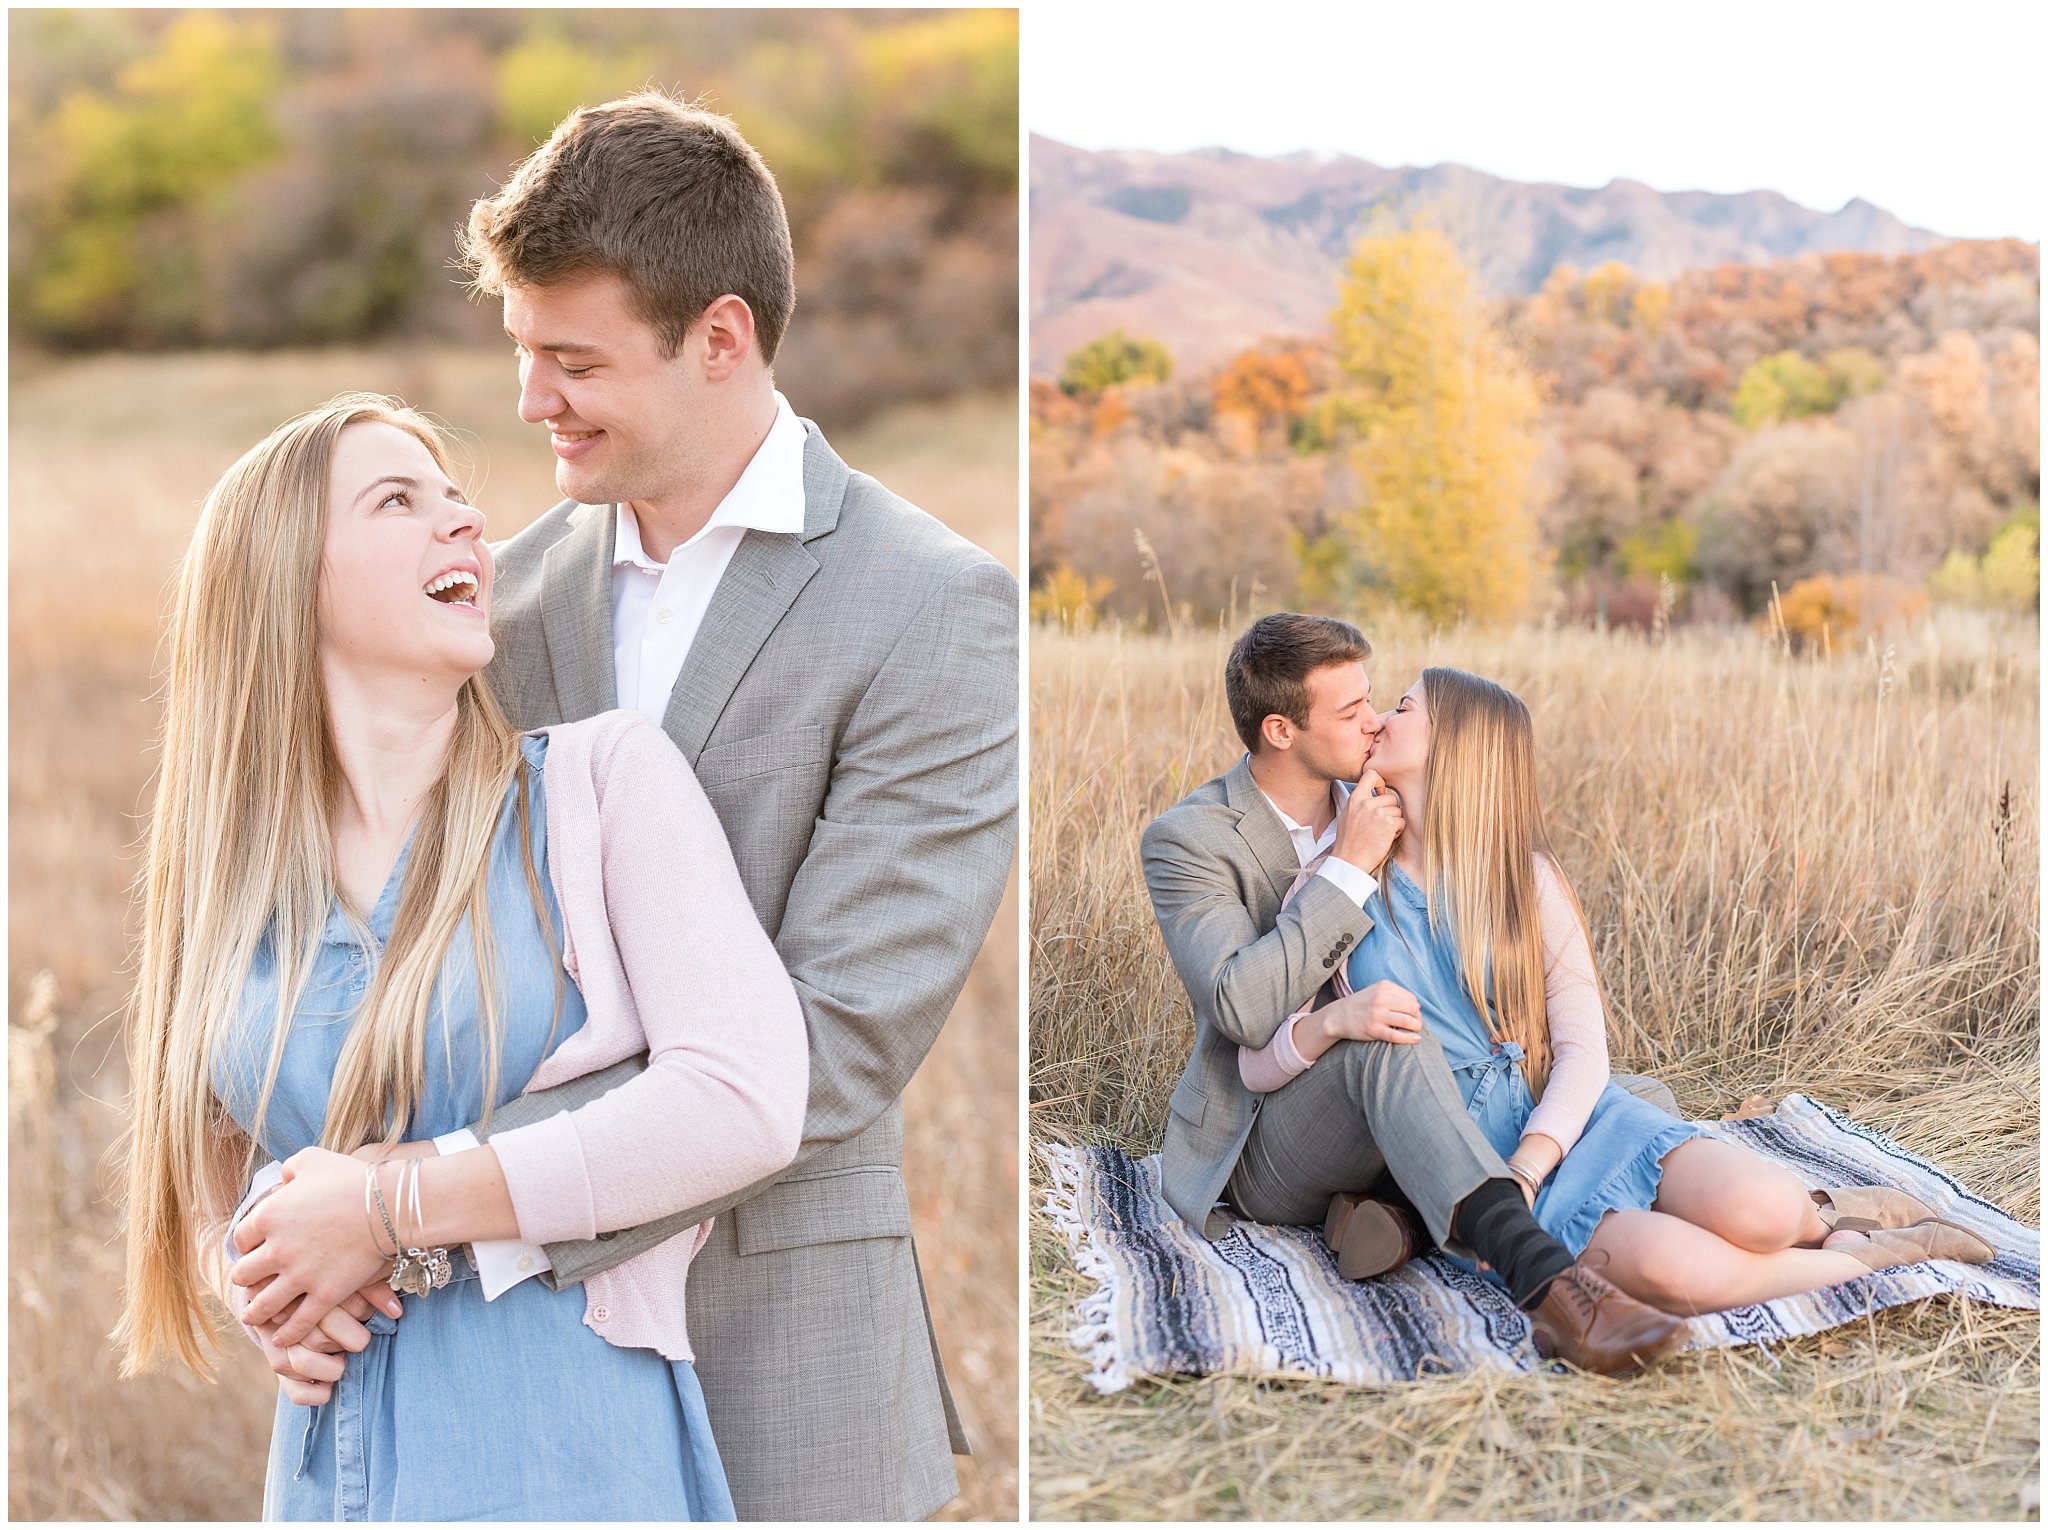 Couple wearing muted colors laughing and kissing | What to Wear for Your Engagement Session | Utah Wedding Photographers | Jessie and Dallin